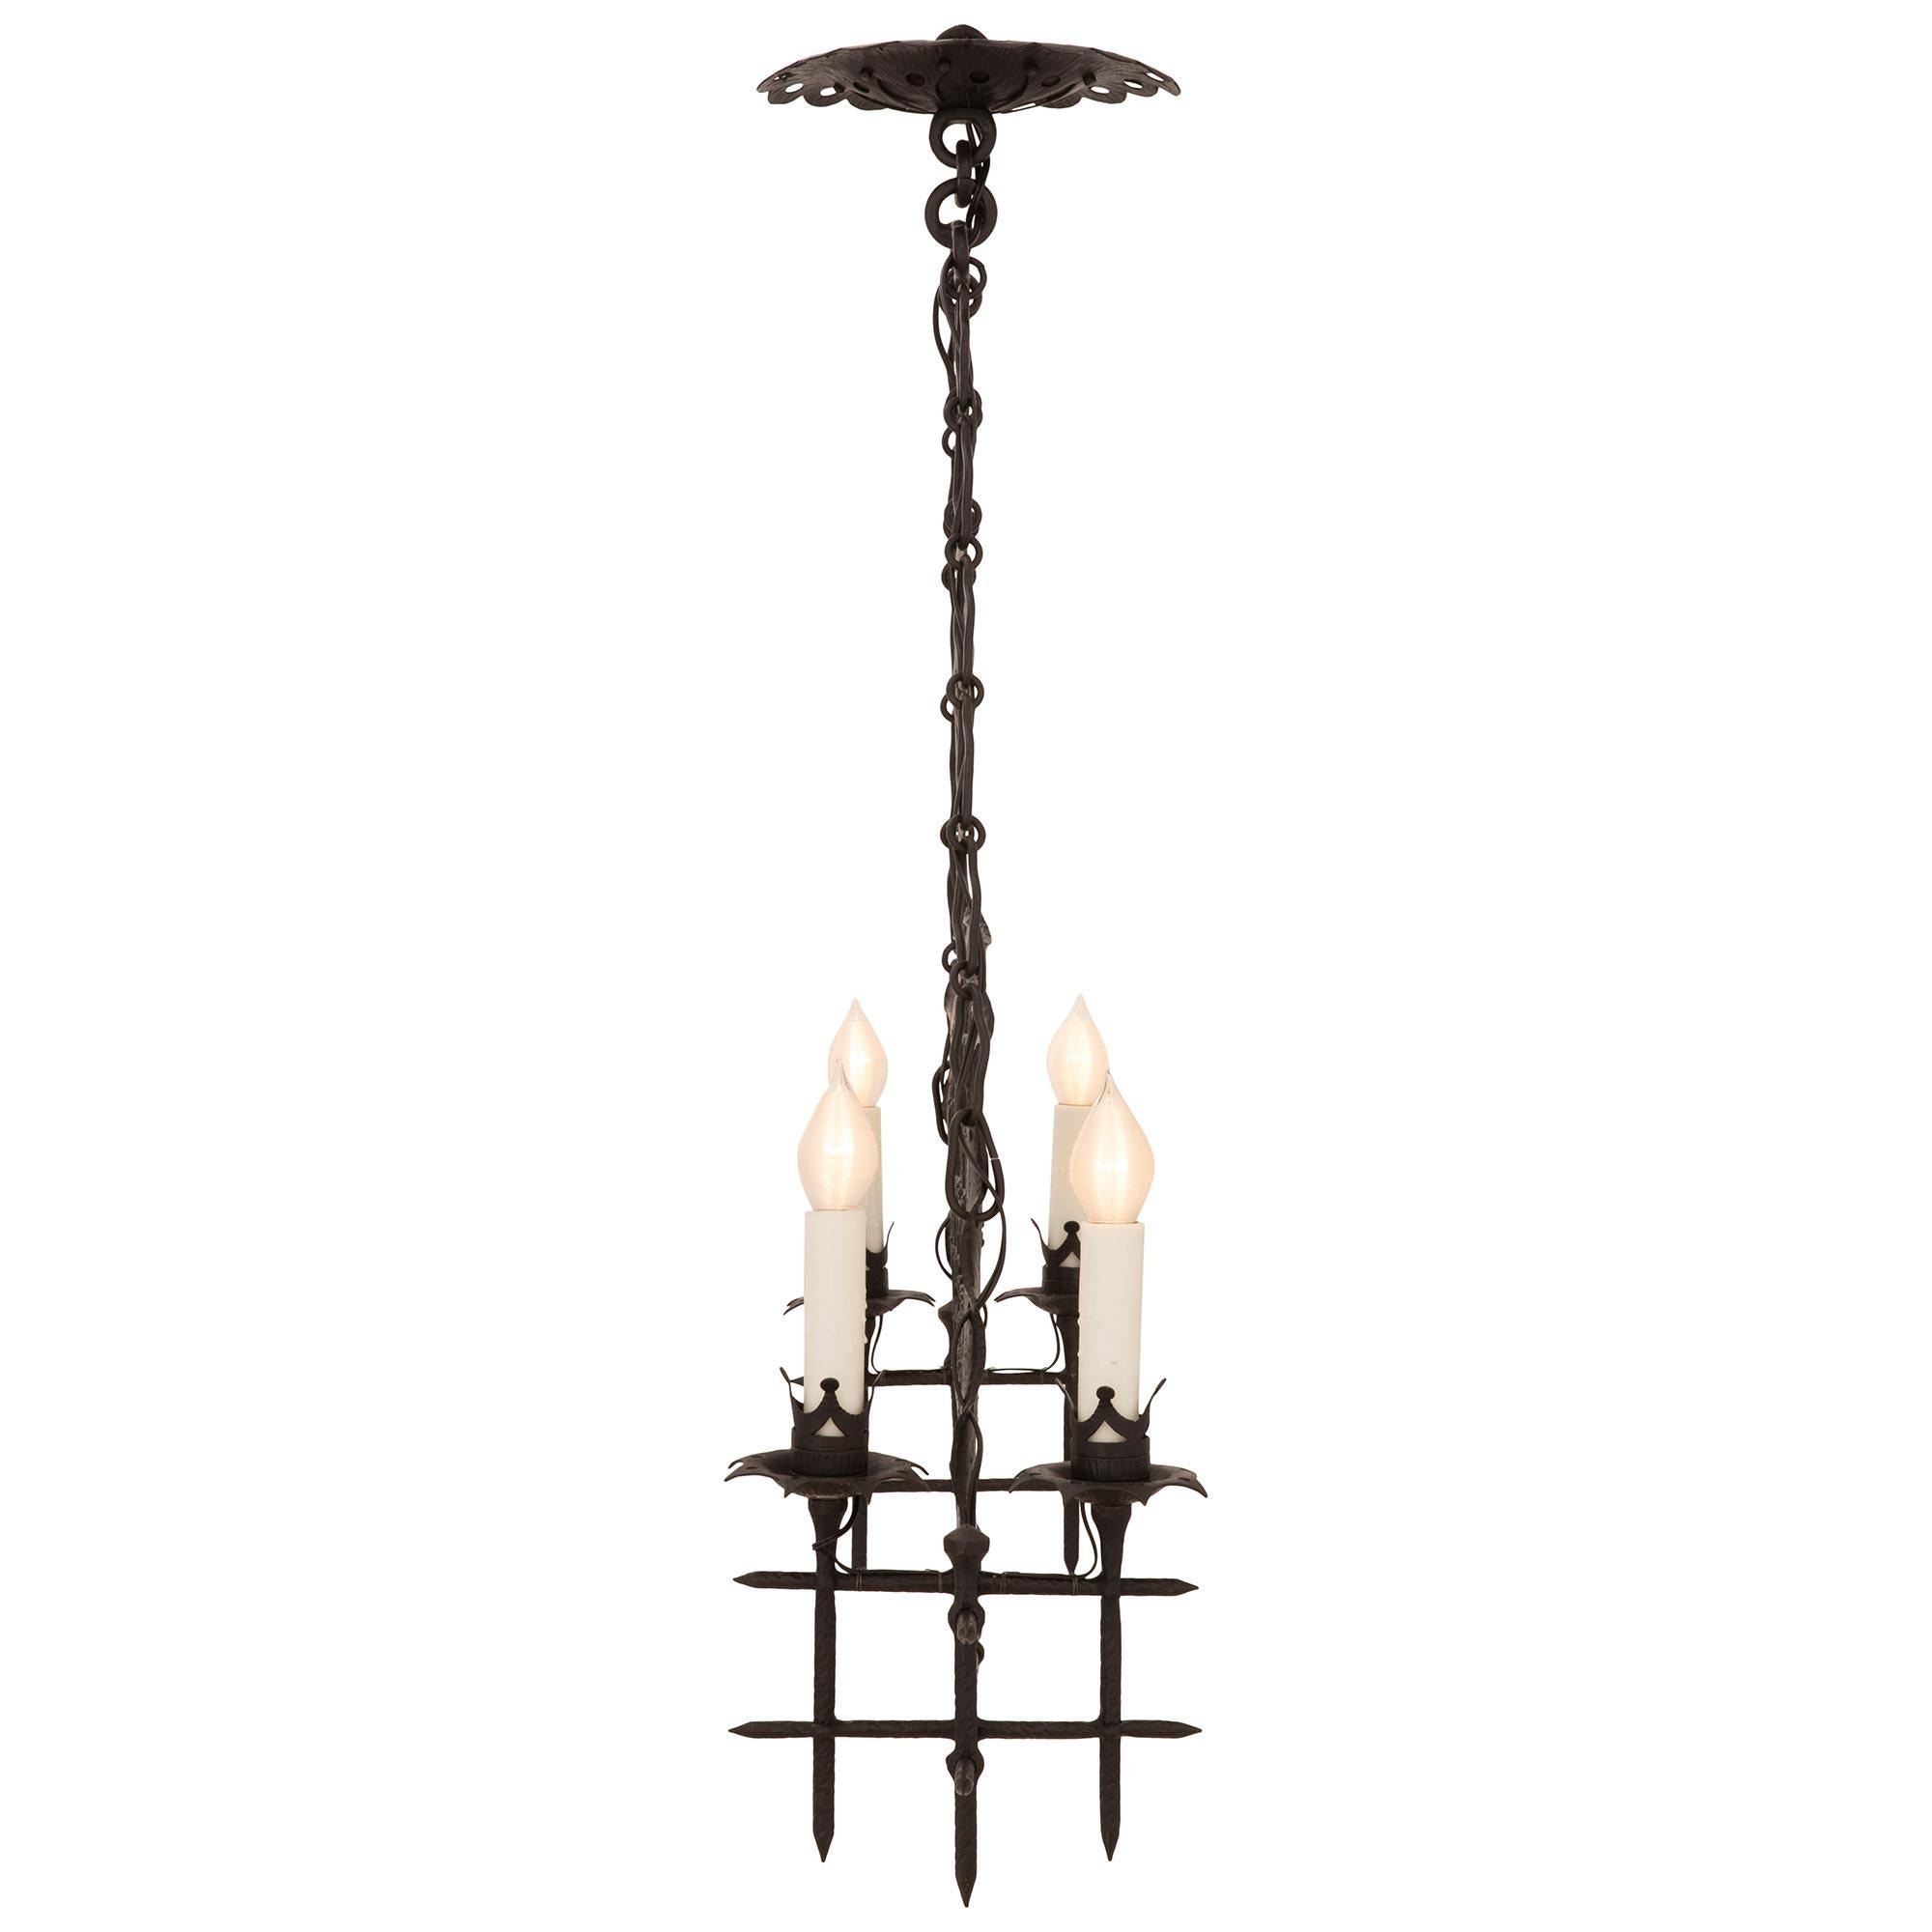 Italian 19th Century Renaissance St. Wrought Iron Chandelier In Good Condition For Sale In West Palm Beach, FL